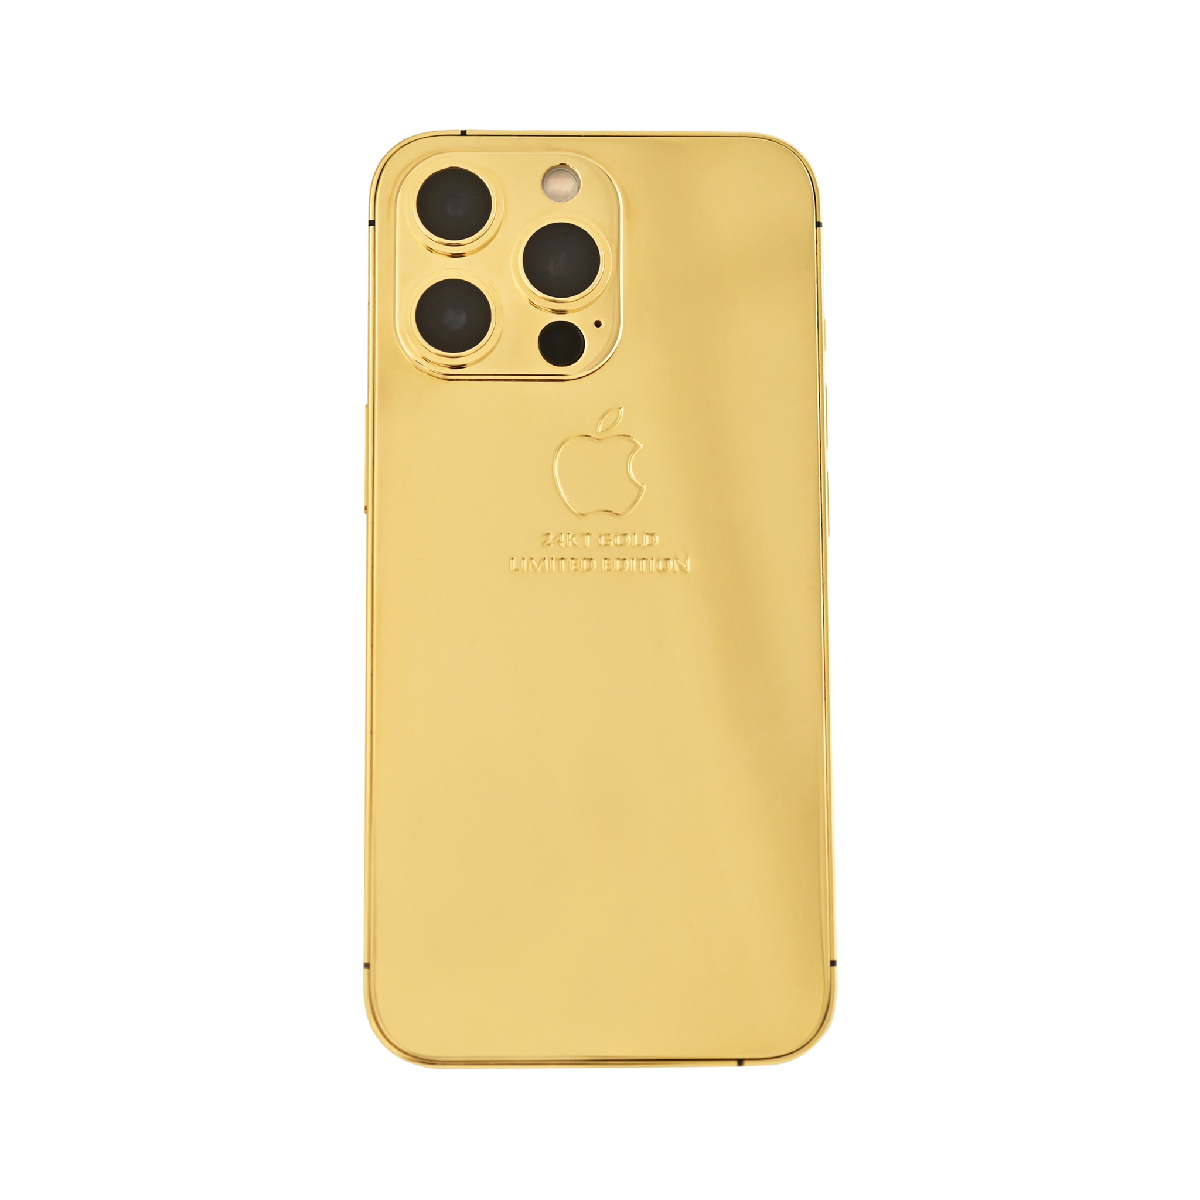 Caviar Luxury 24k Full Gold Customized iPhone 14 Pro 256 GB Limited Edition